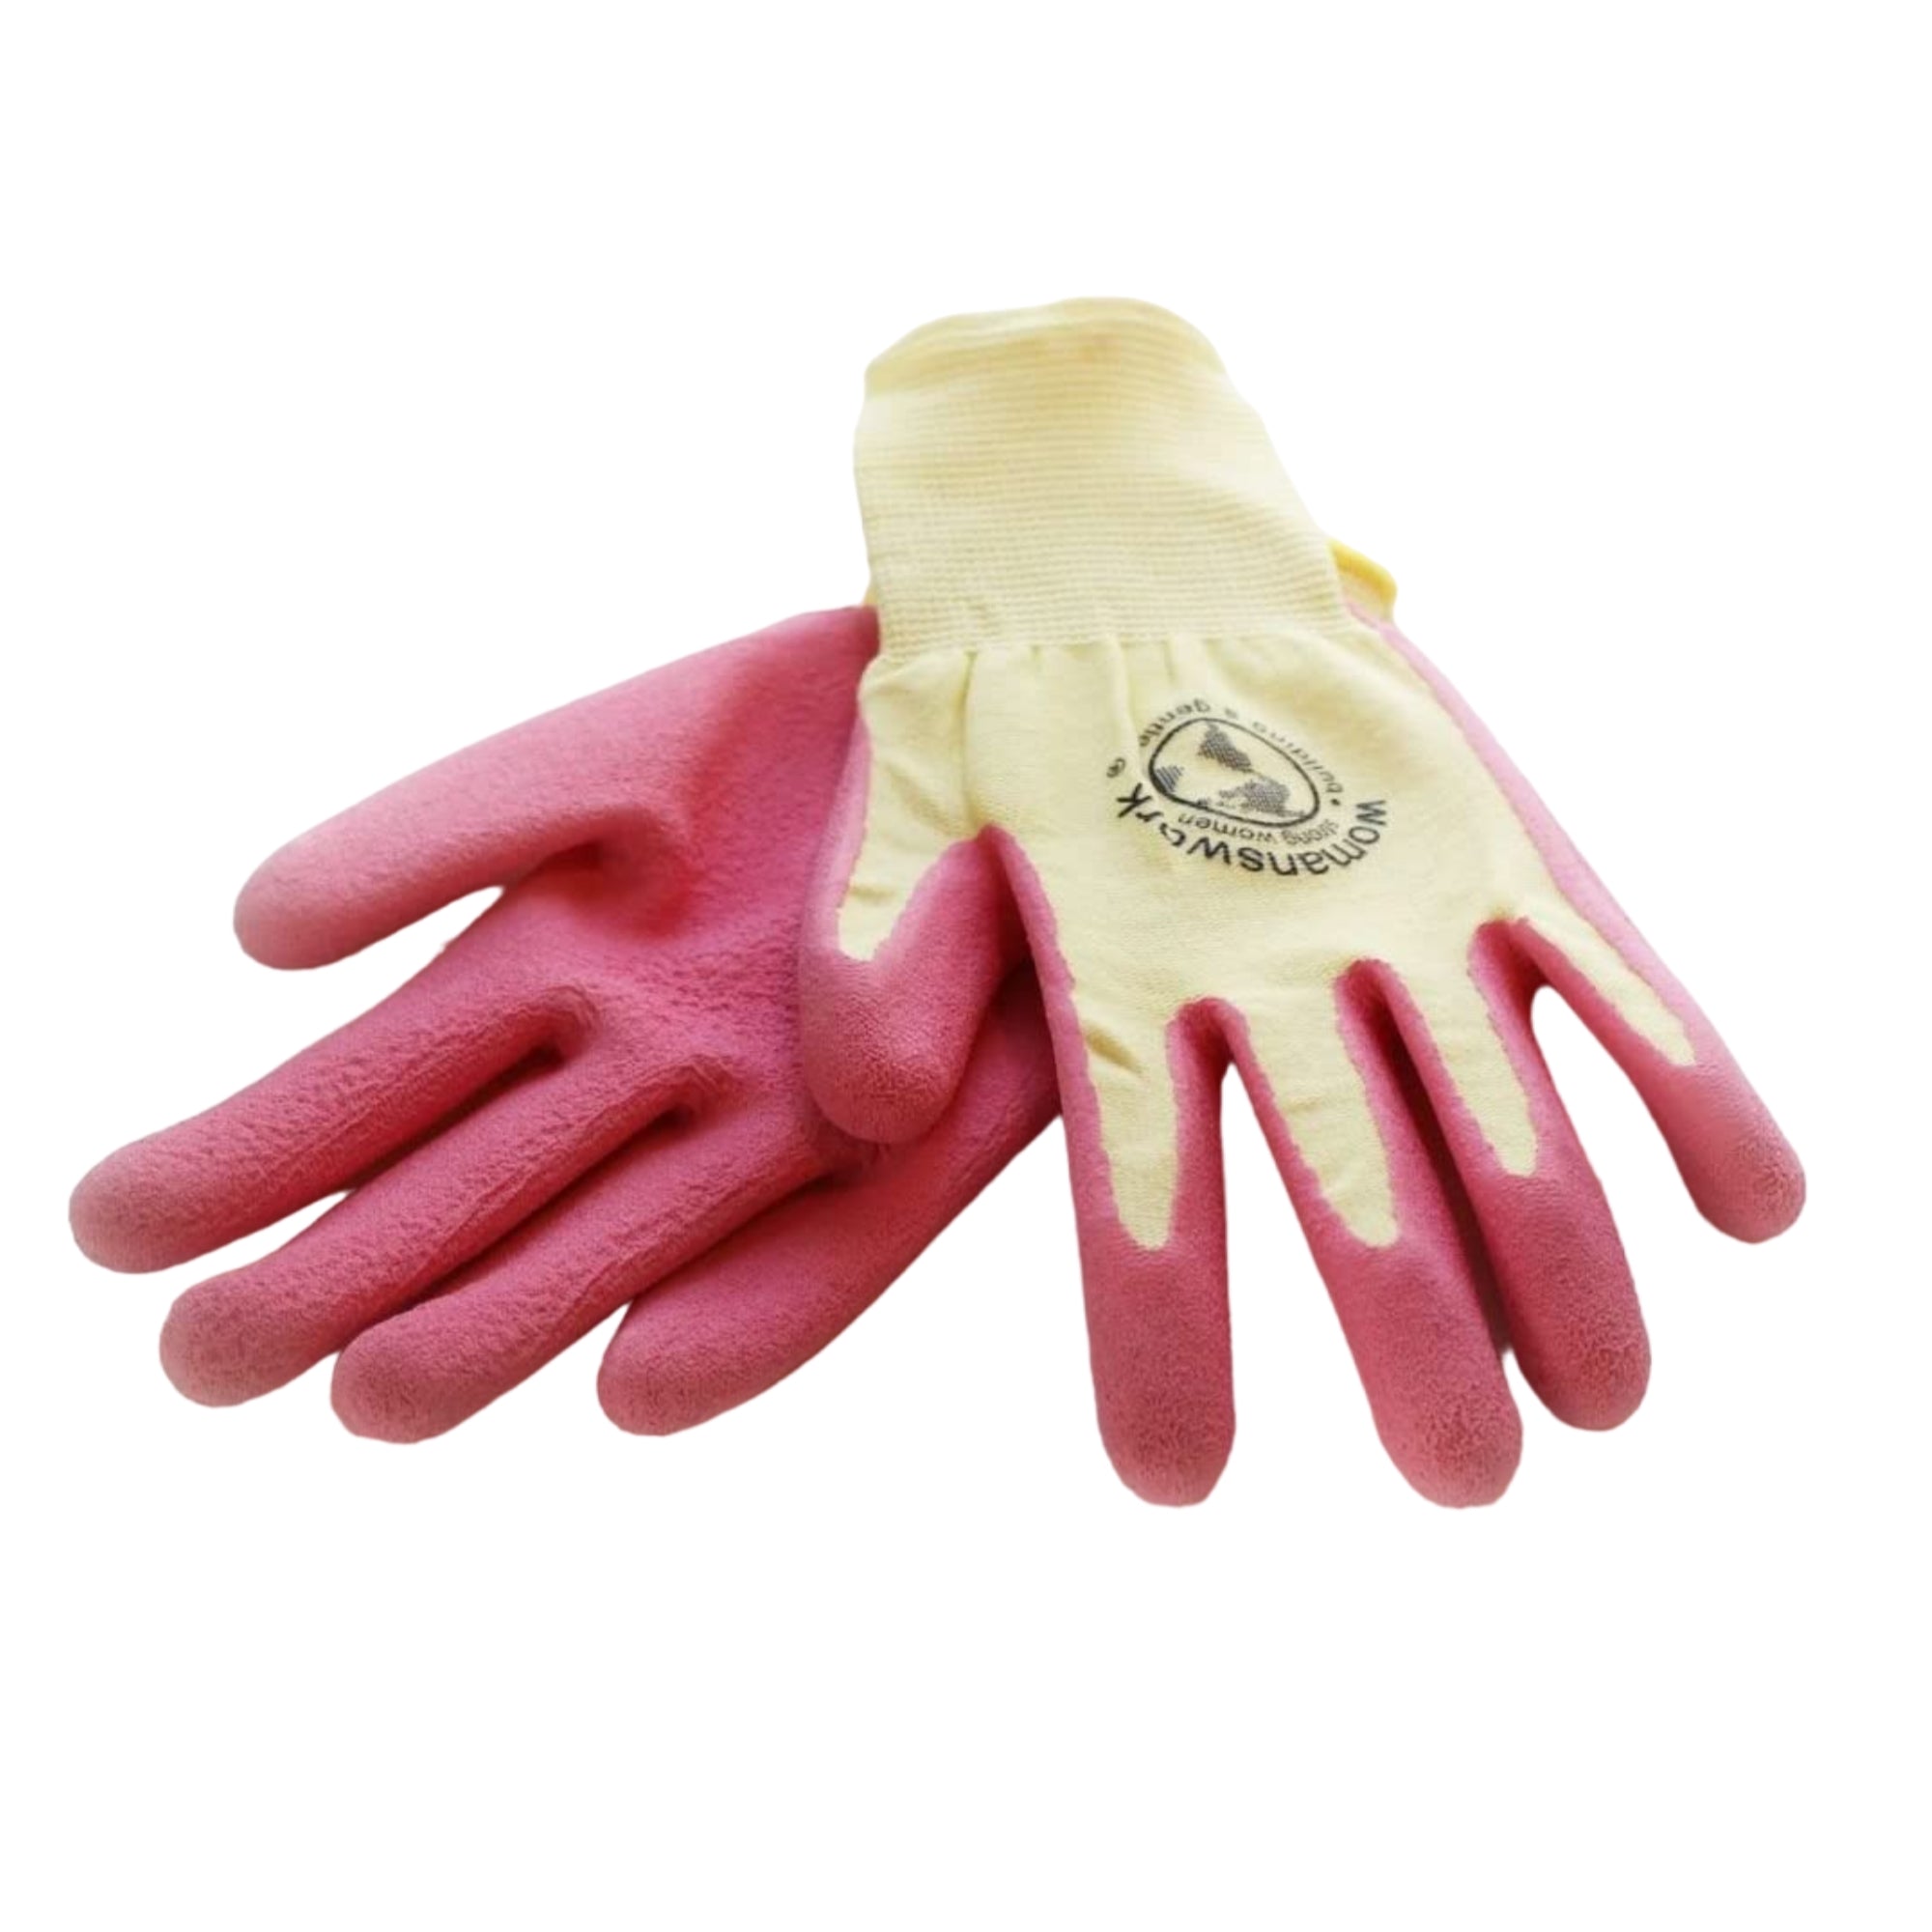 Womanswork Gardening Protective Weeding Gloves, Pink, Large (Pack of 1)